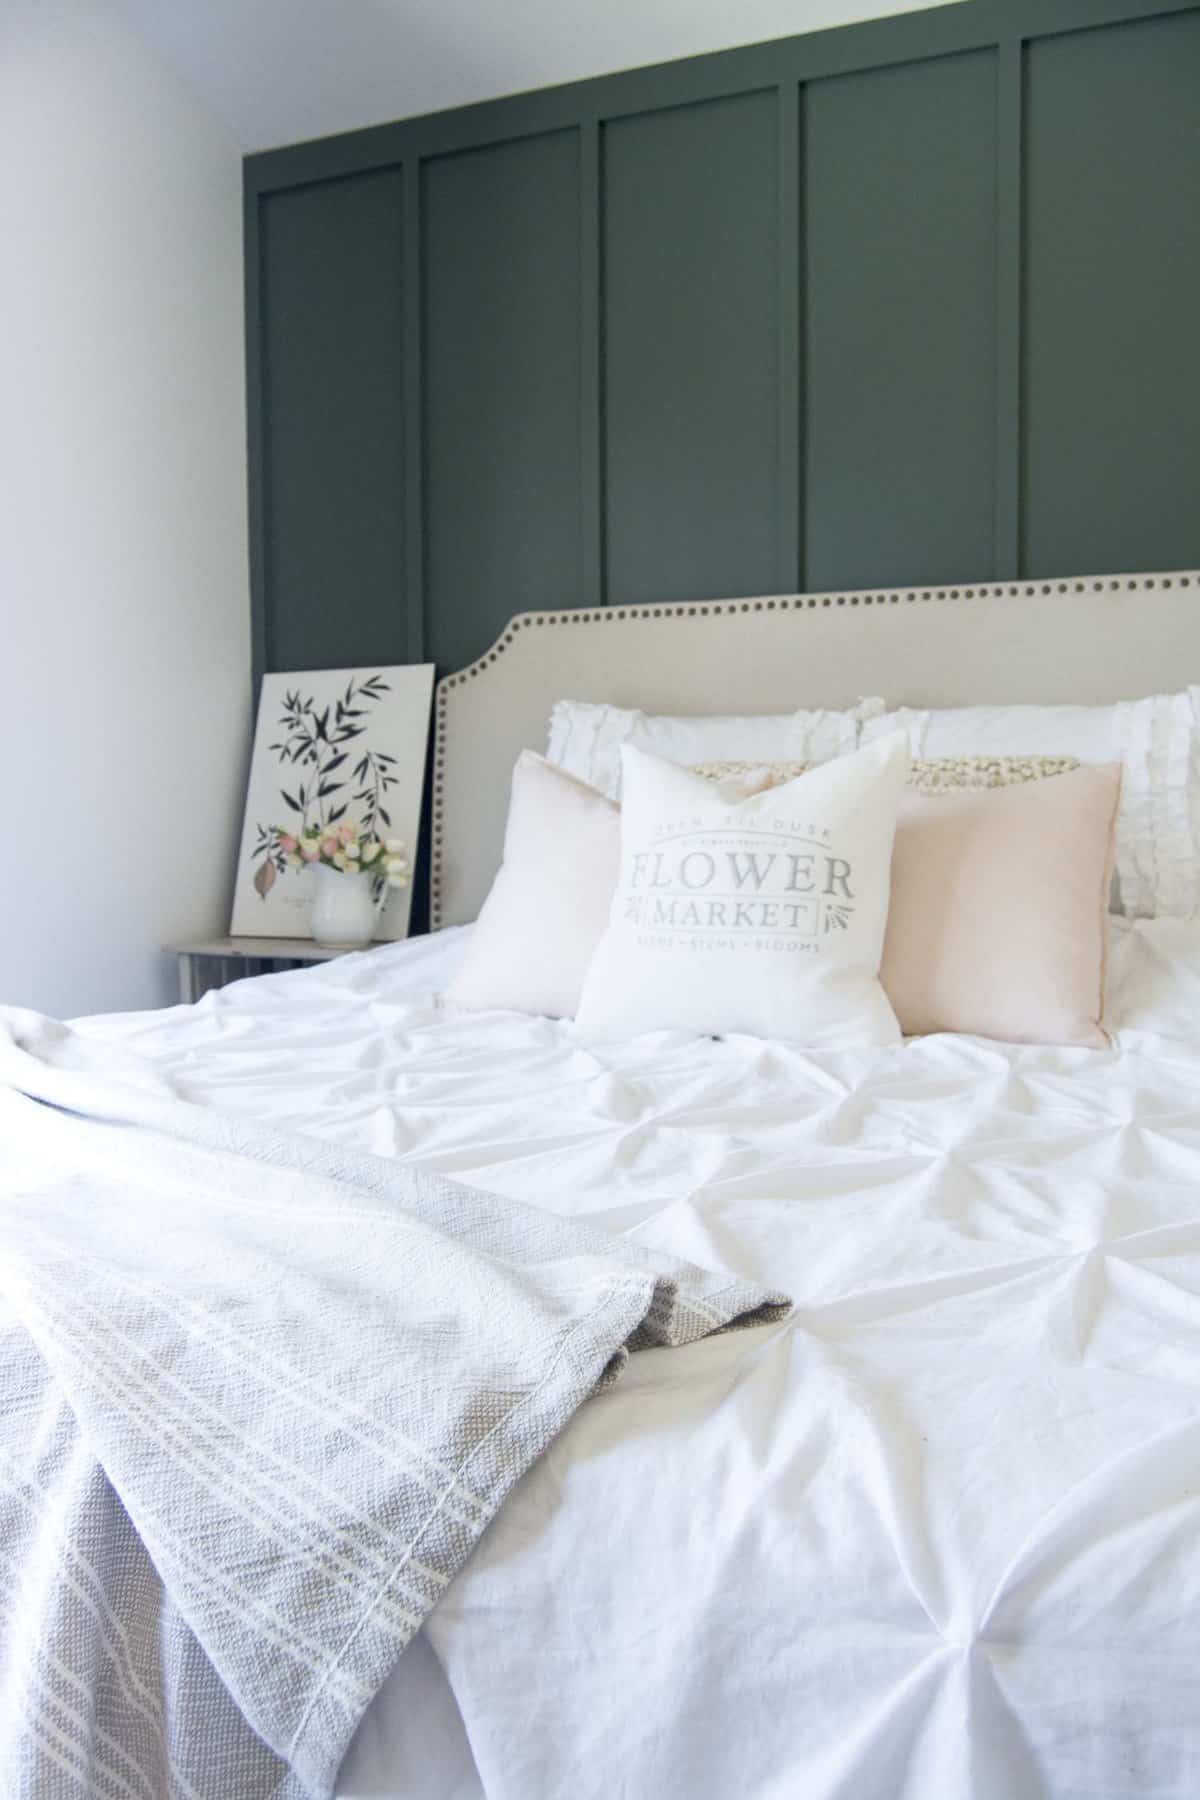 A master bedroom should be your oasis! That is exactly what I created when I installed a modern farmhouse bedroom accent wall. Head to the blog to see my master bedroom retreat and to get the tutorial and paint sources!